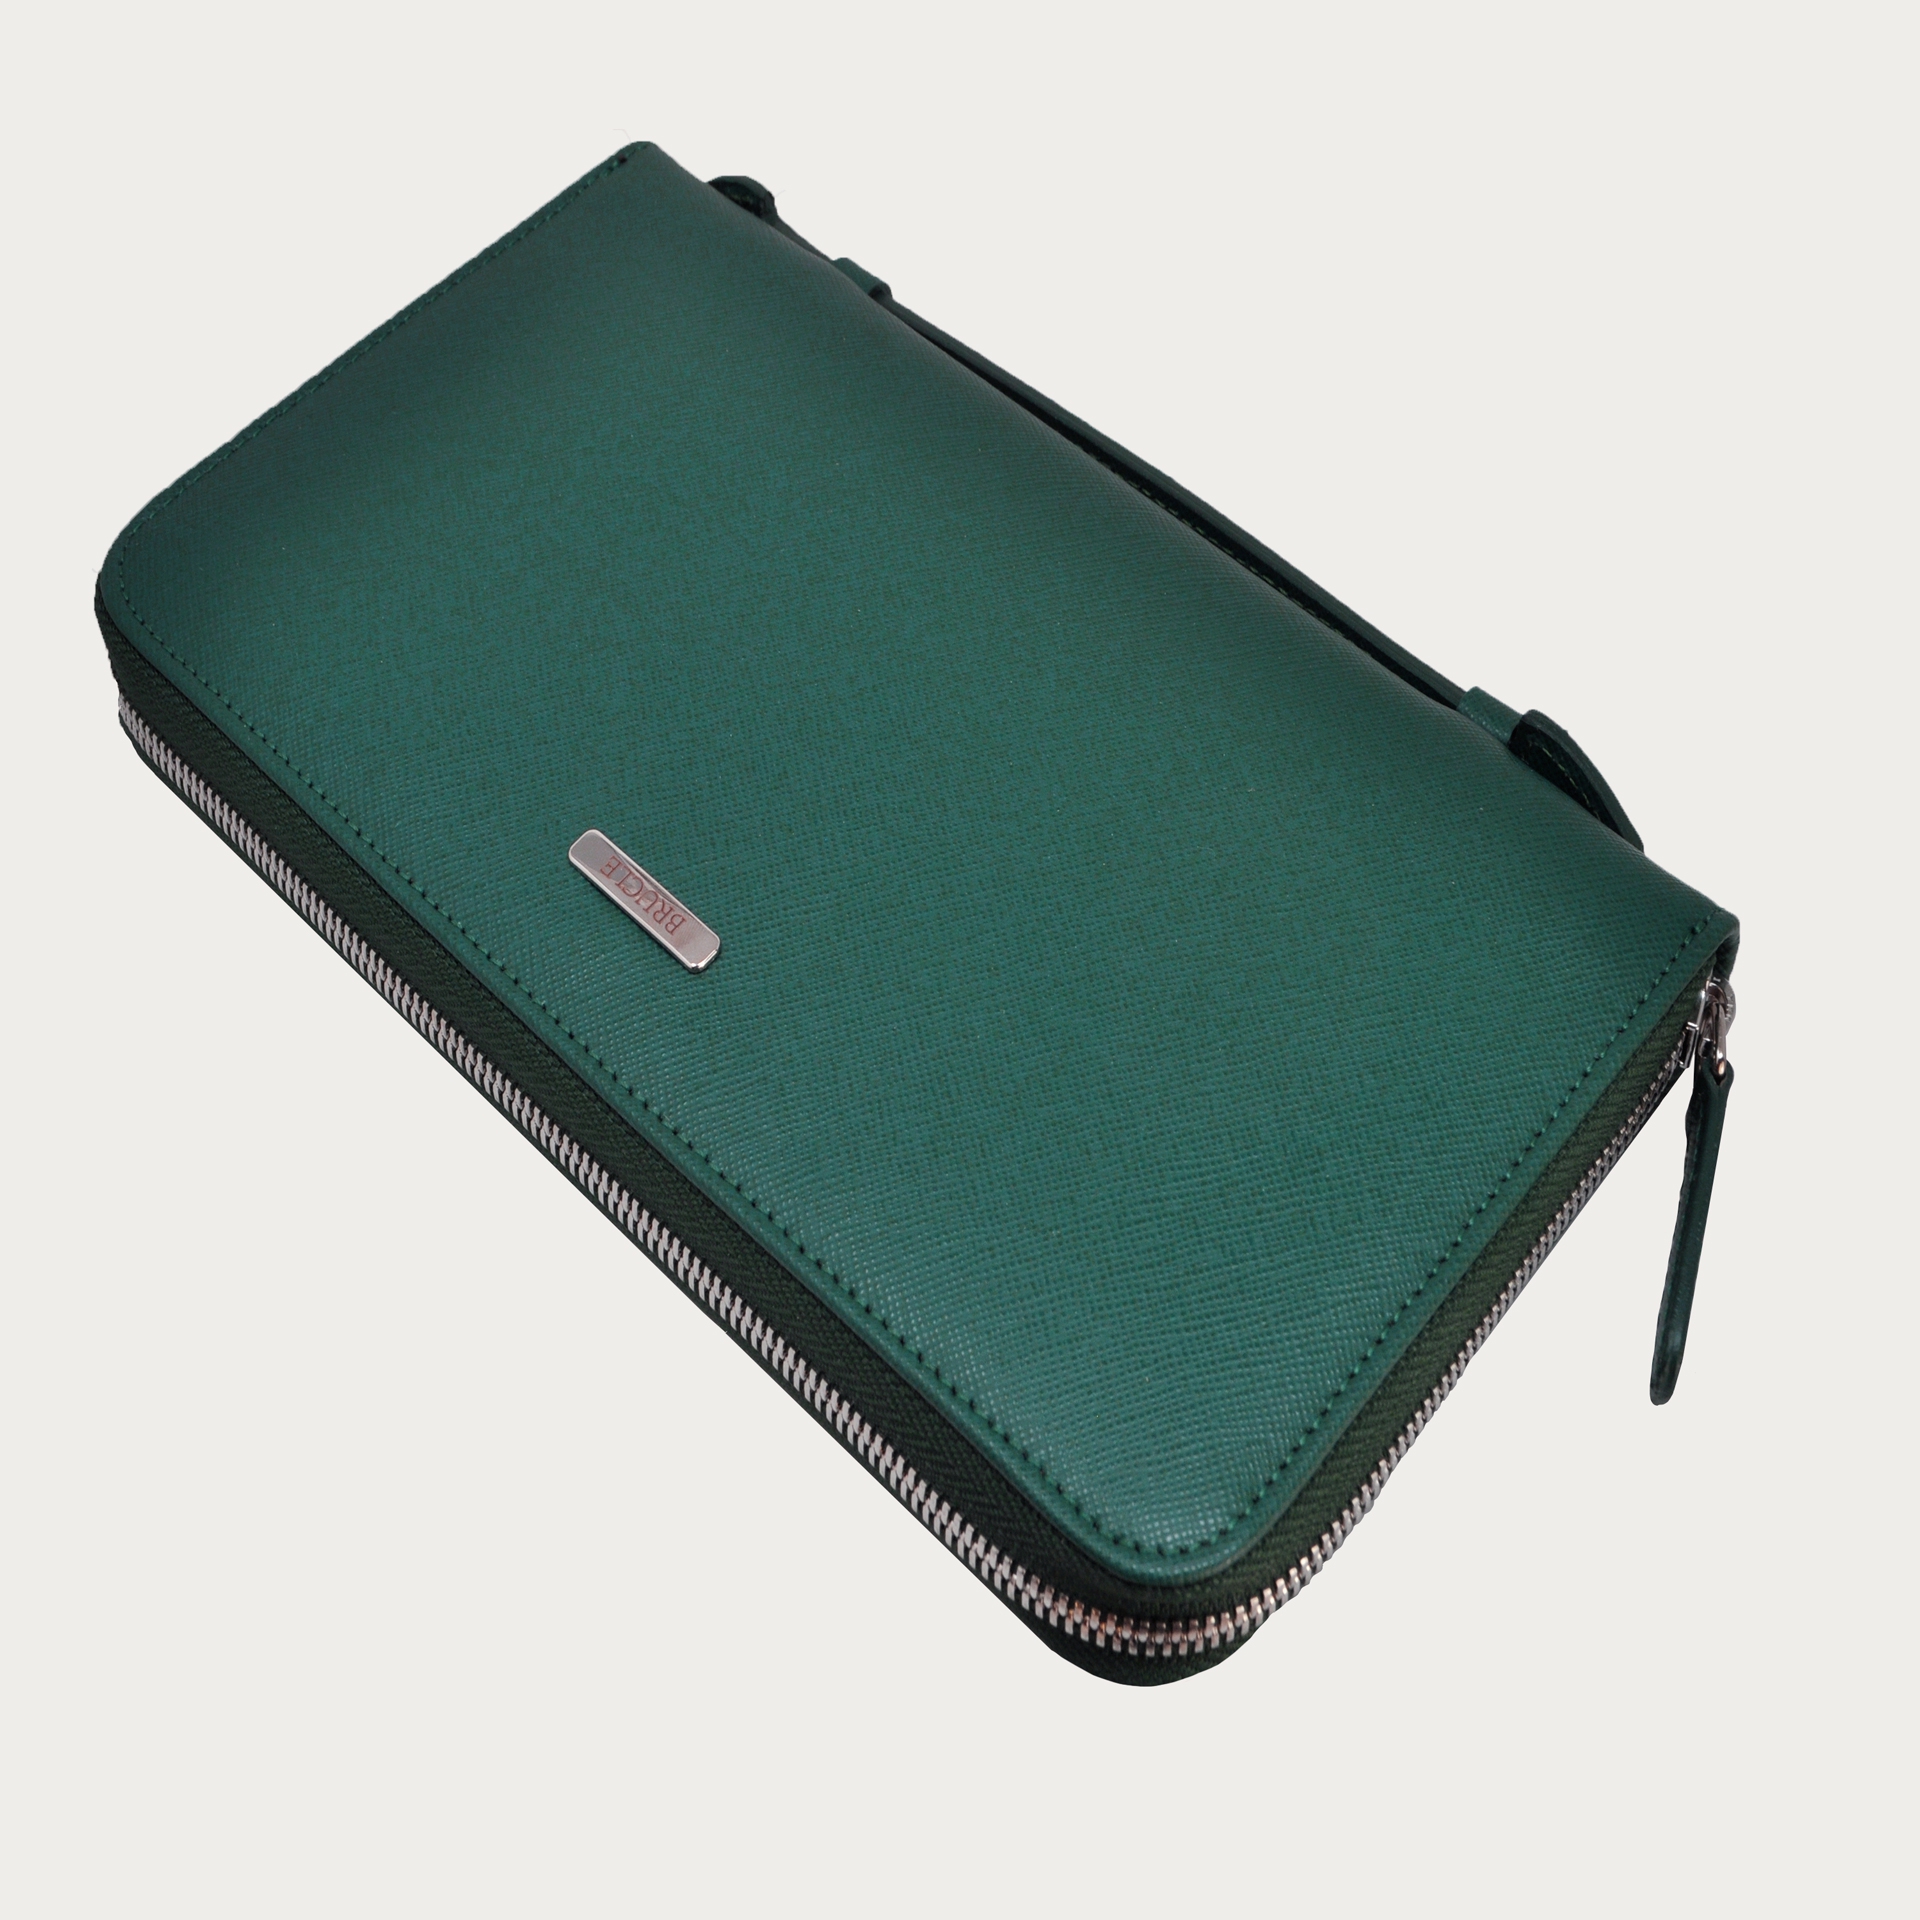 Green saffiano Leather wallet document holder with zip around